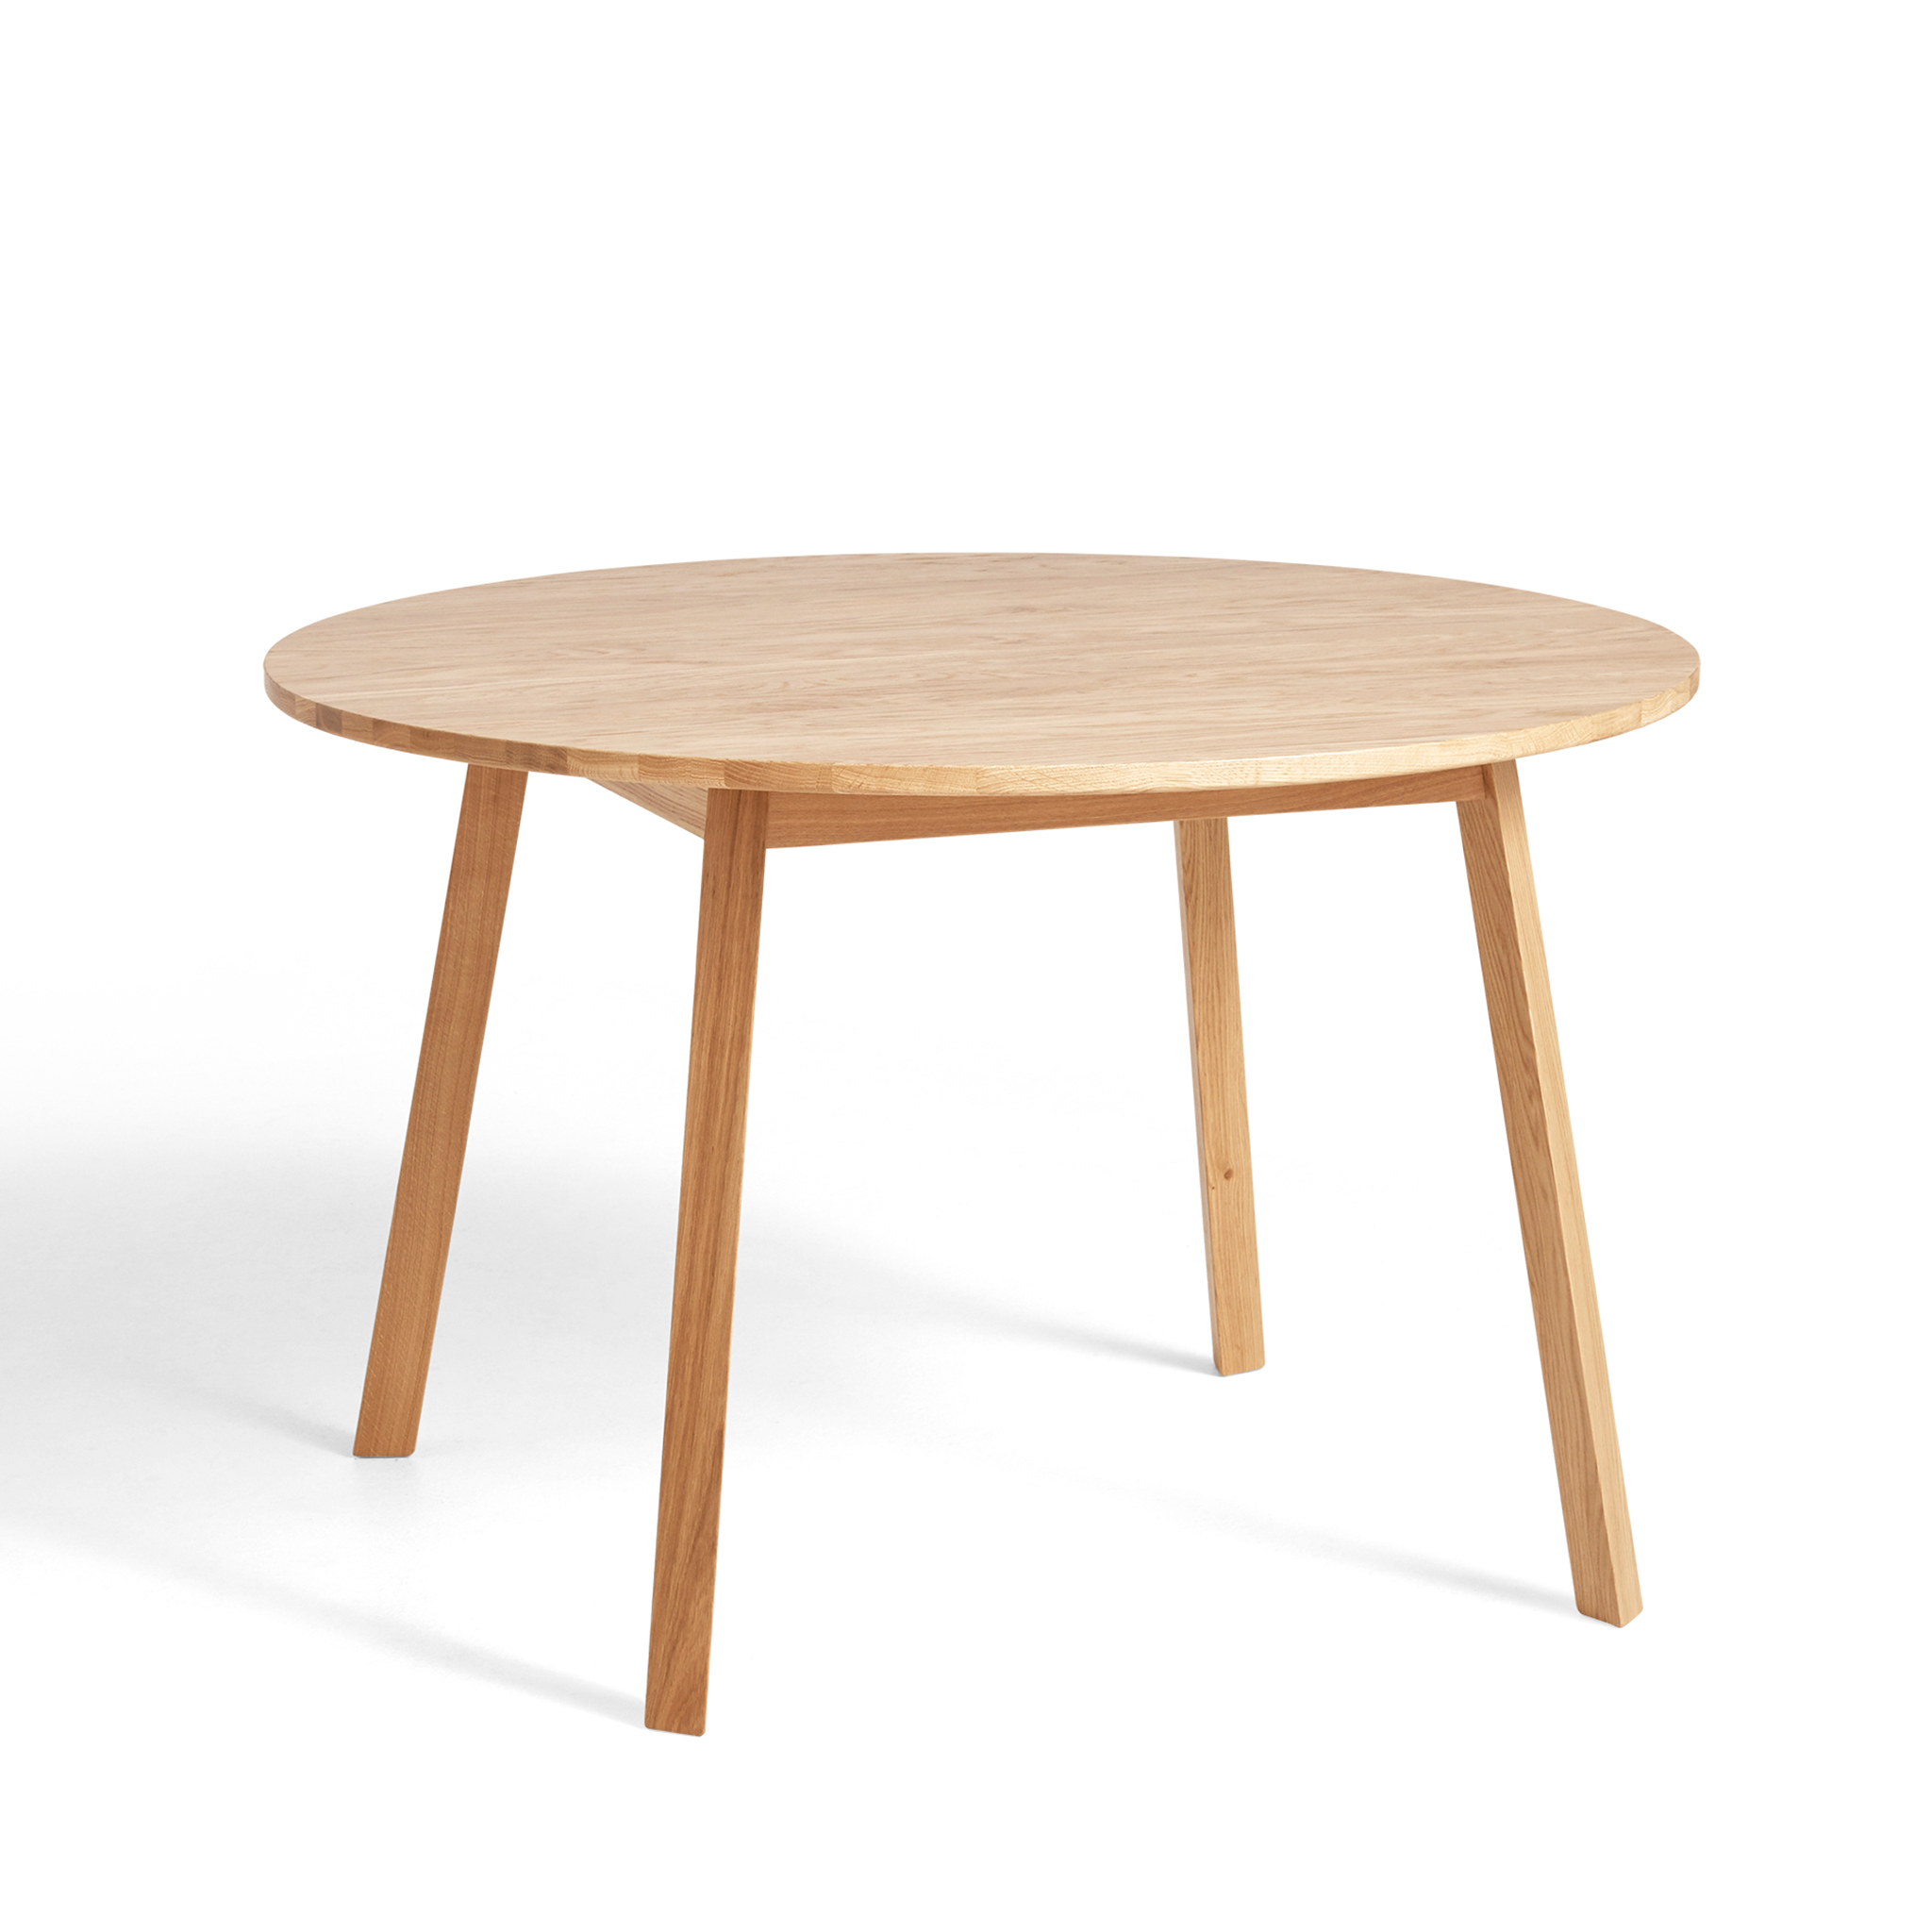 Triangle Leg Table Round / Lacquered Oak by Hay - clearance